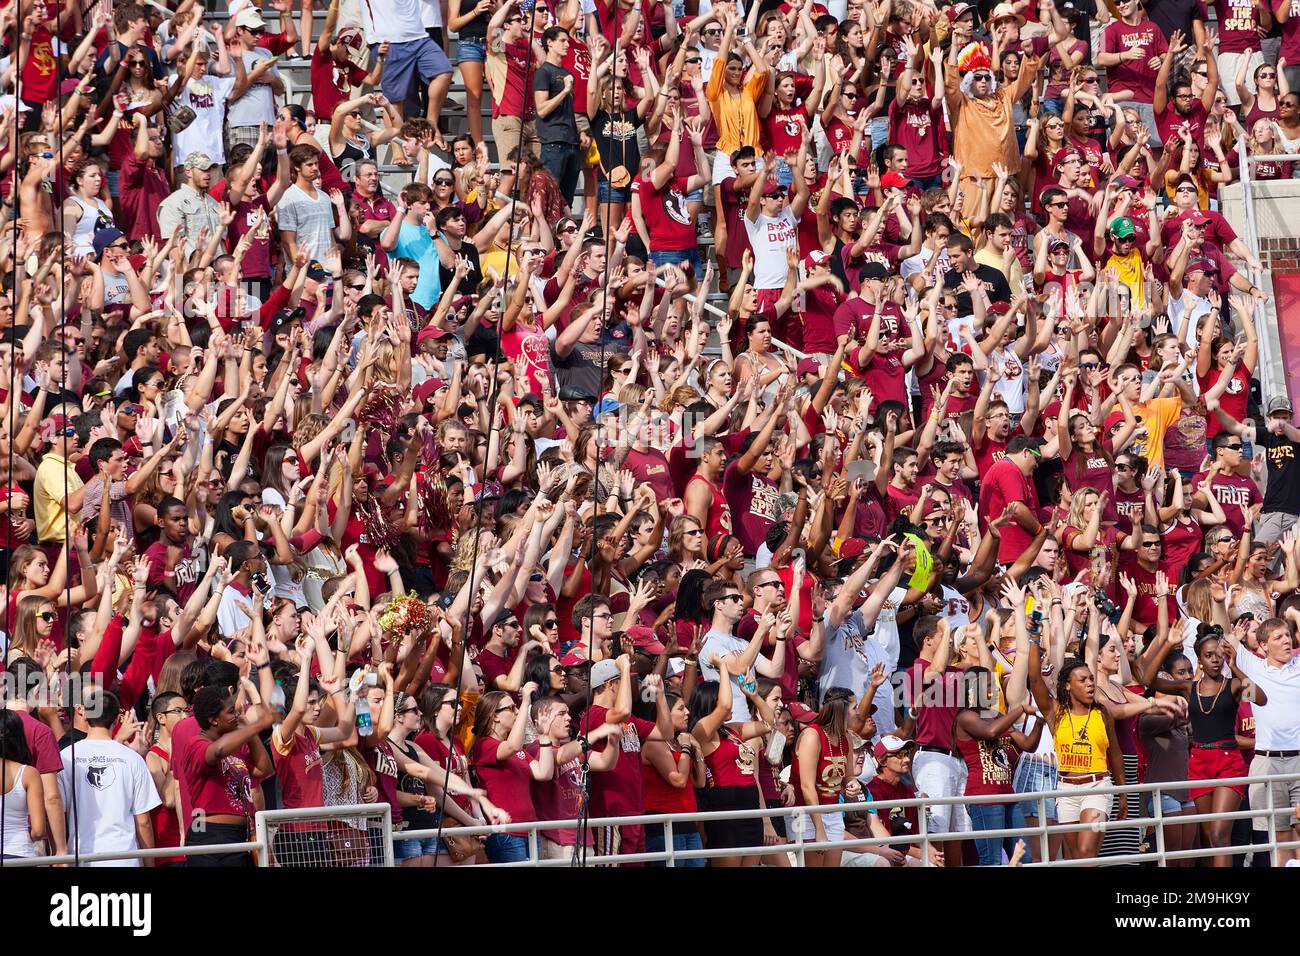 Tallahassee, Florida - October 27, 2012:  Florida State University  fans cheering at a football game for the Florida State Seminole team. Stock Photo